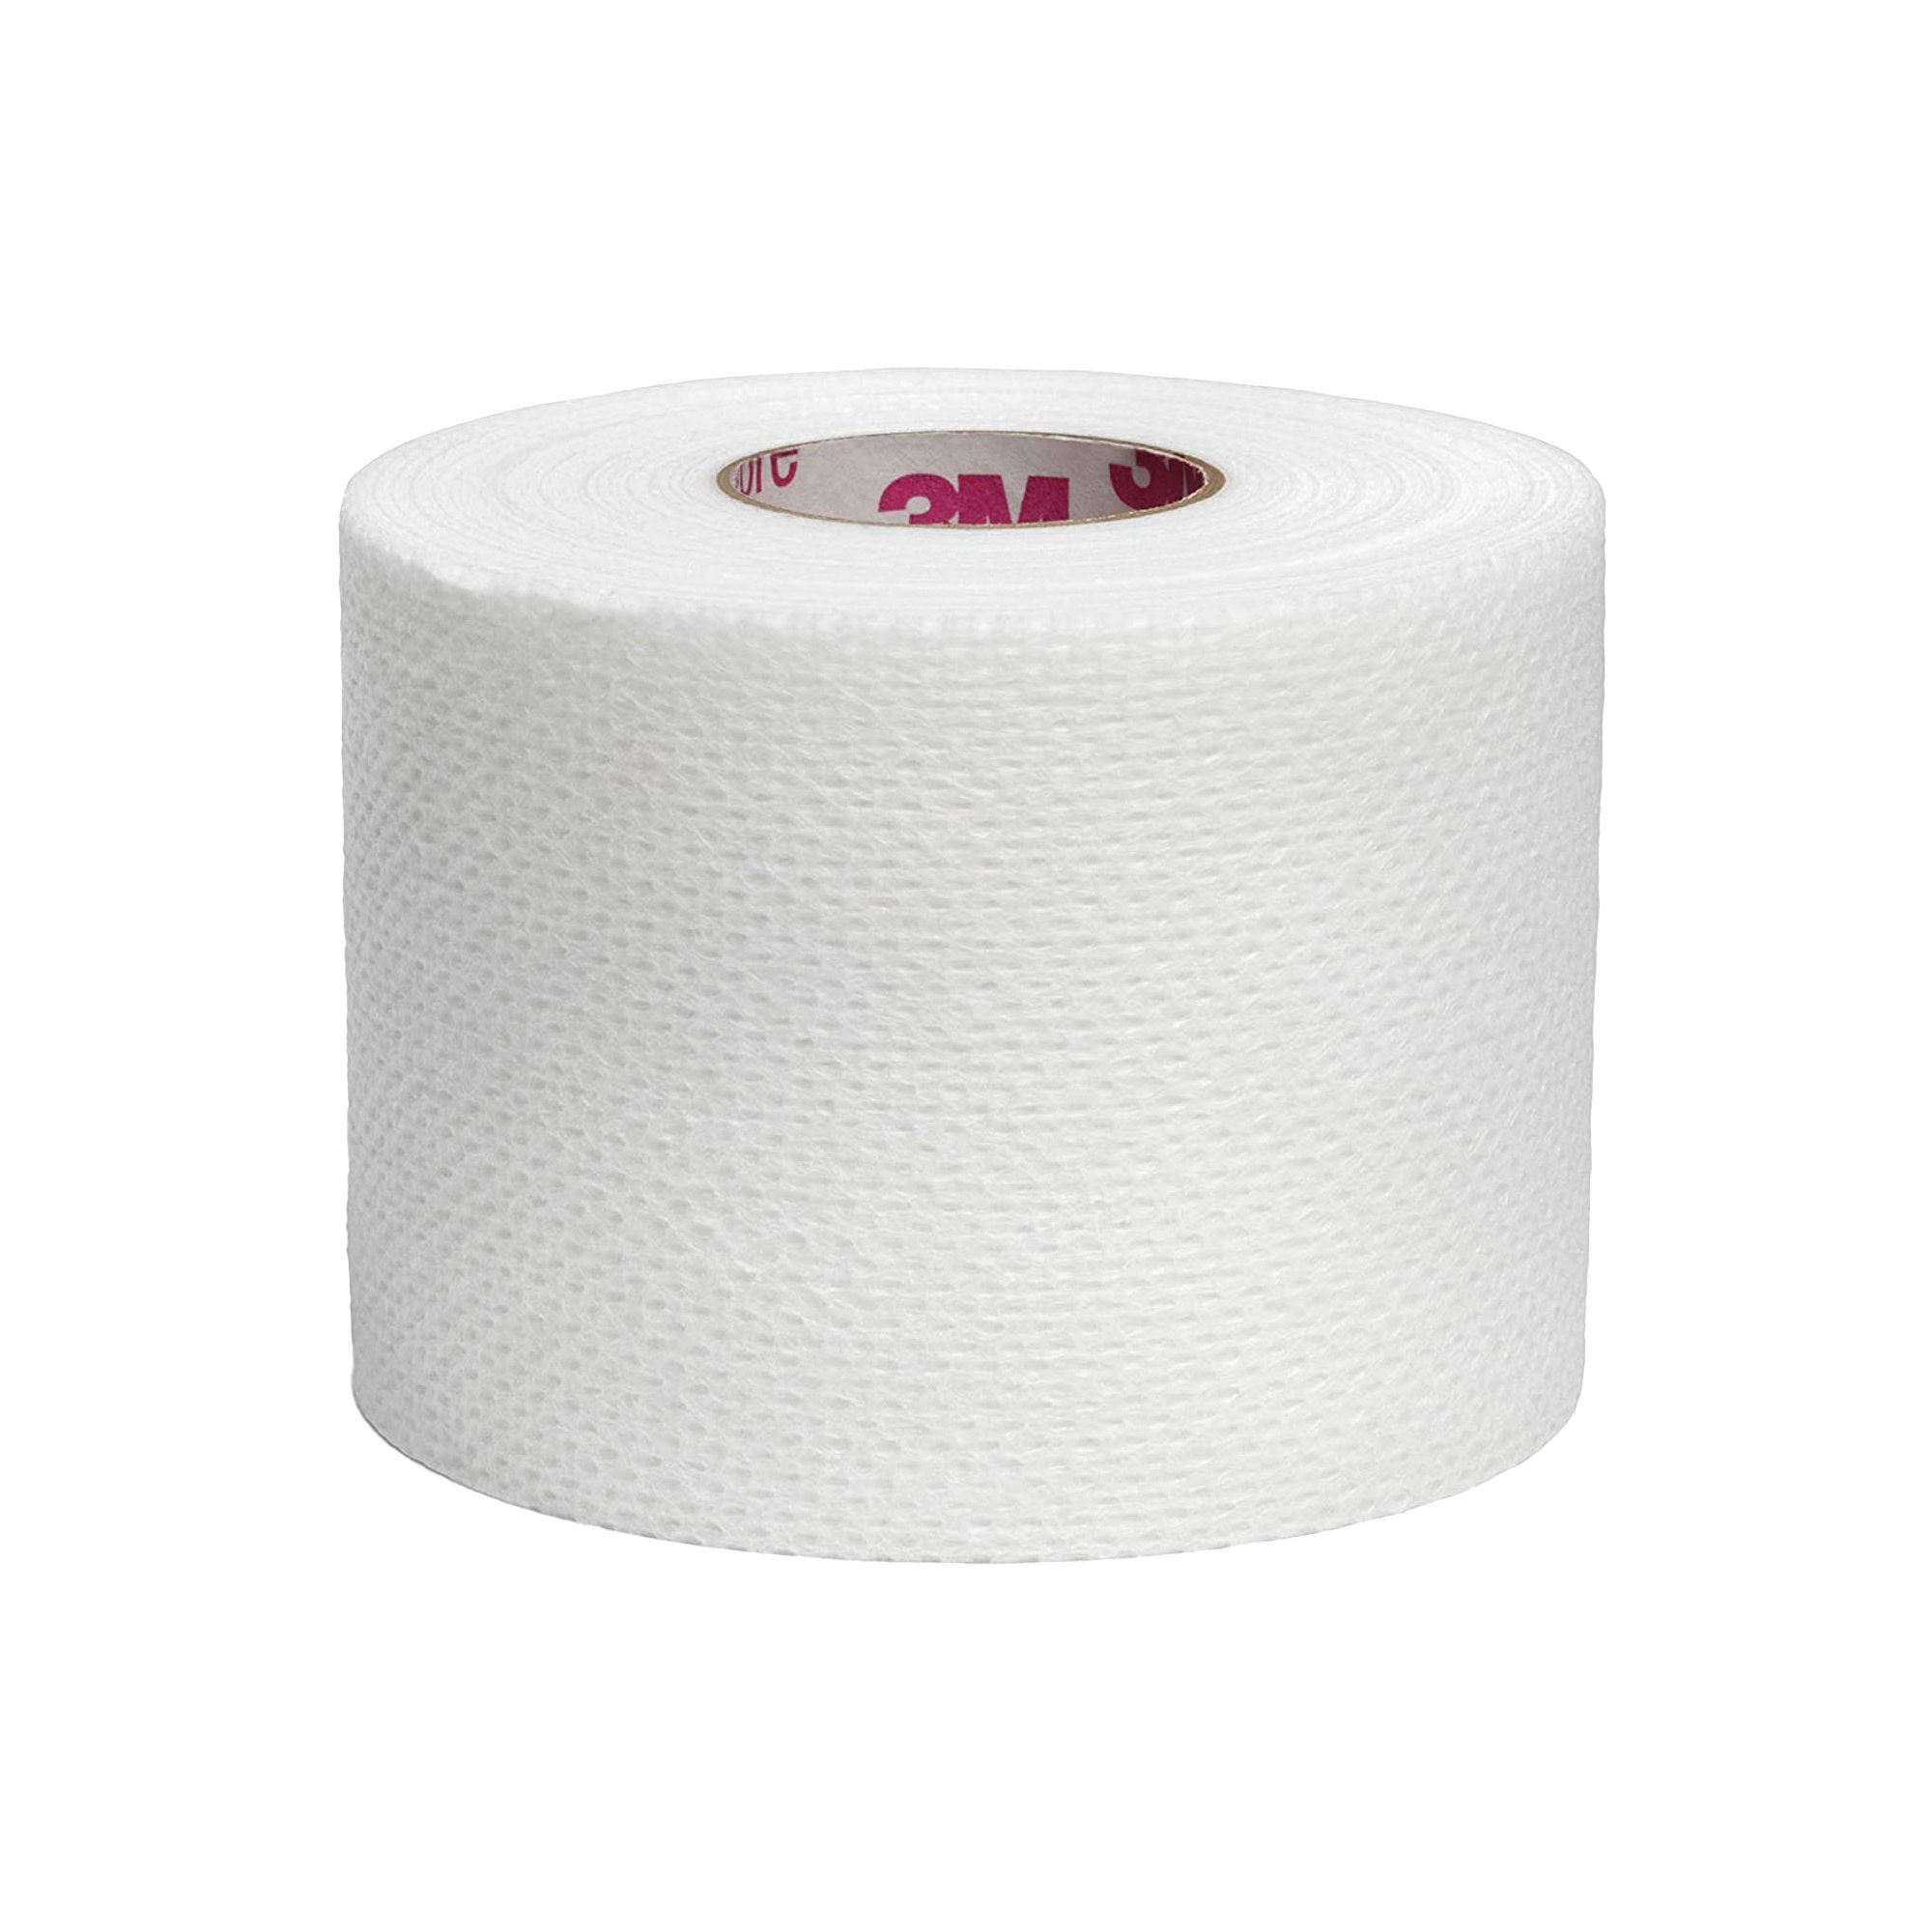 Perforated Medical Tape 3M™ Medipore™ H White 2 Inch X 2 Yard Soft Cloth NonSterile